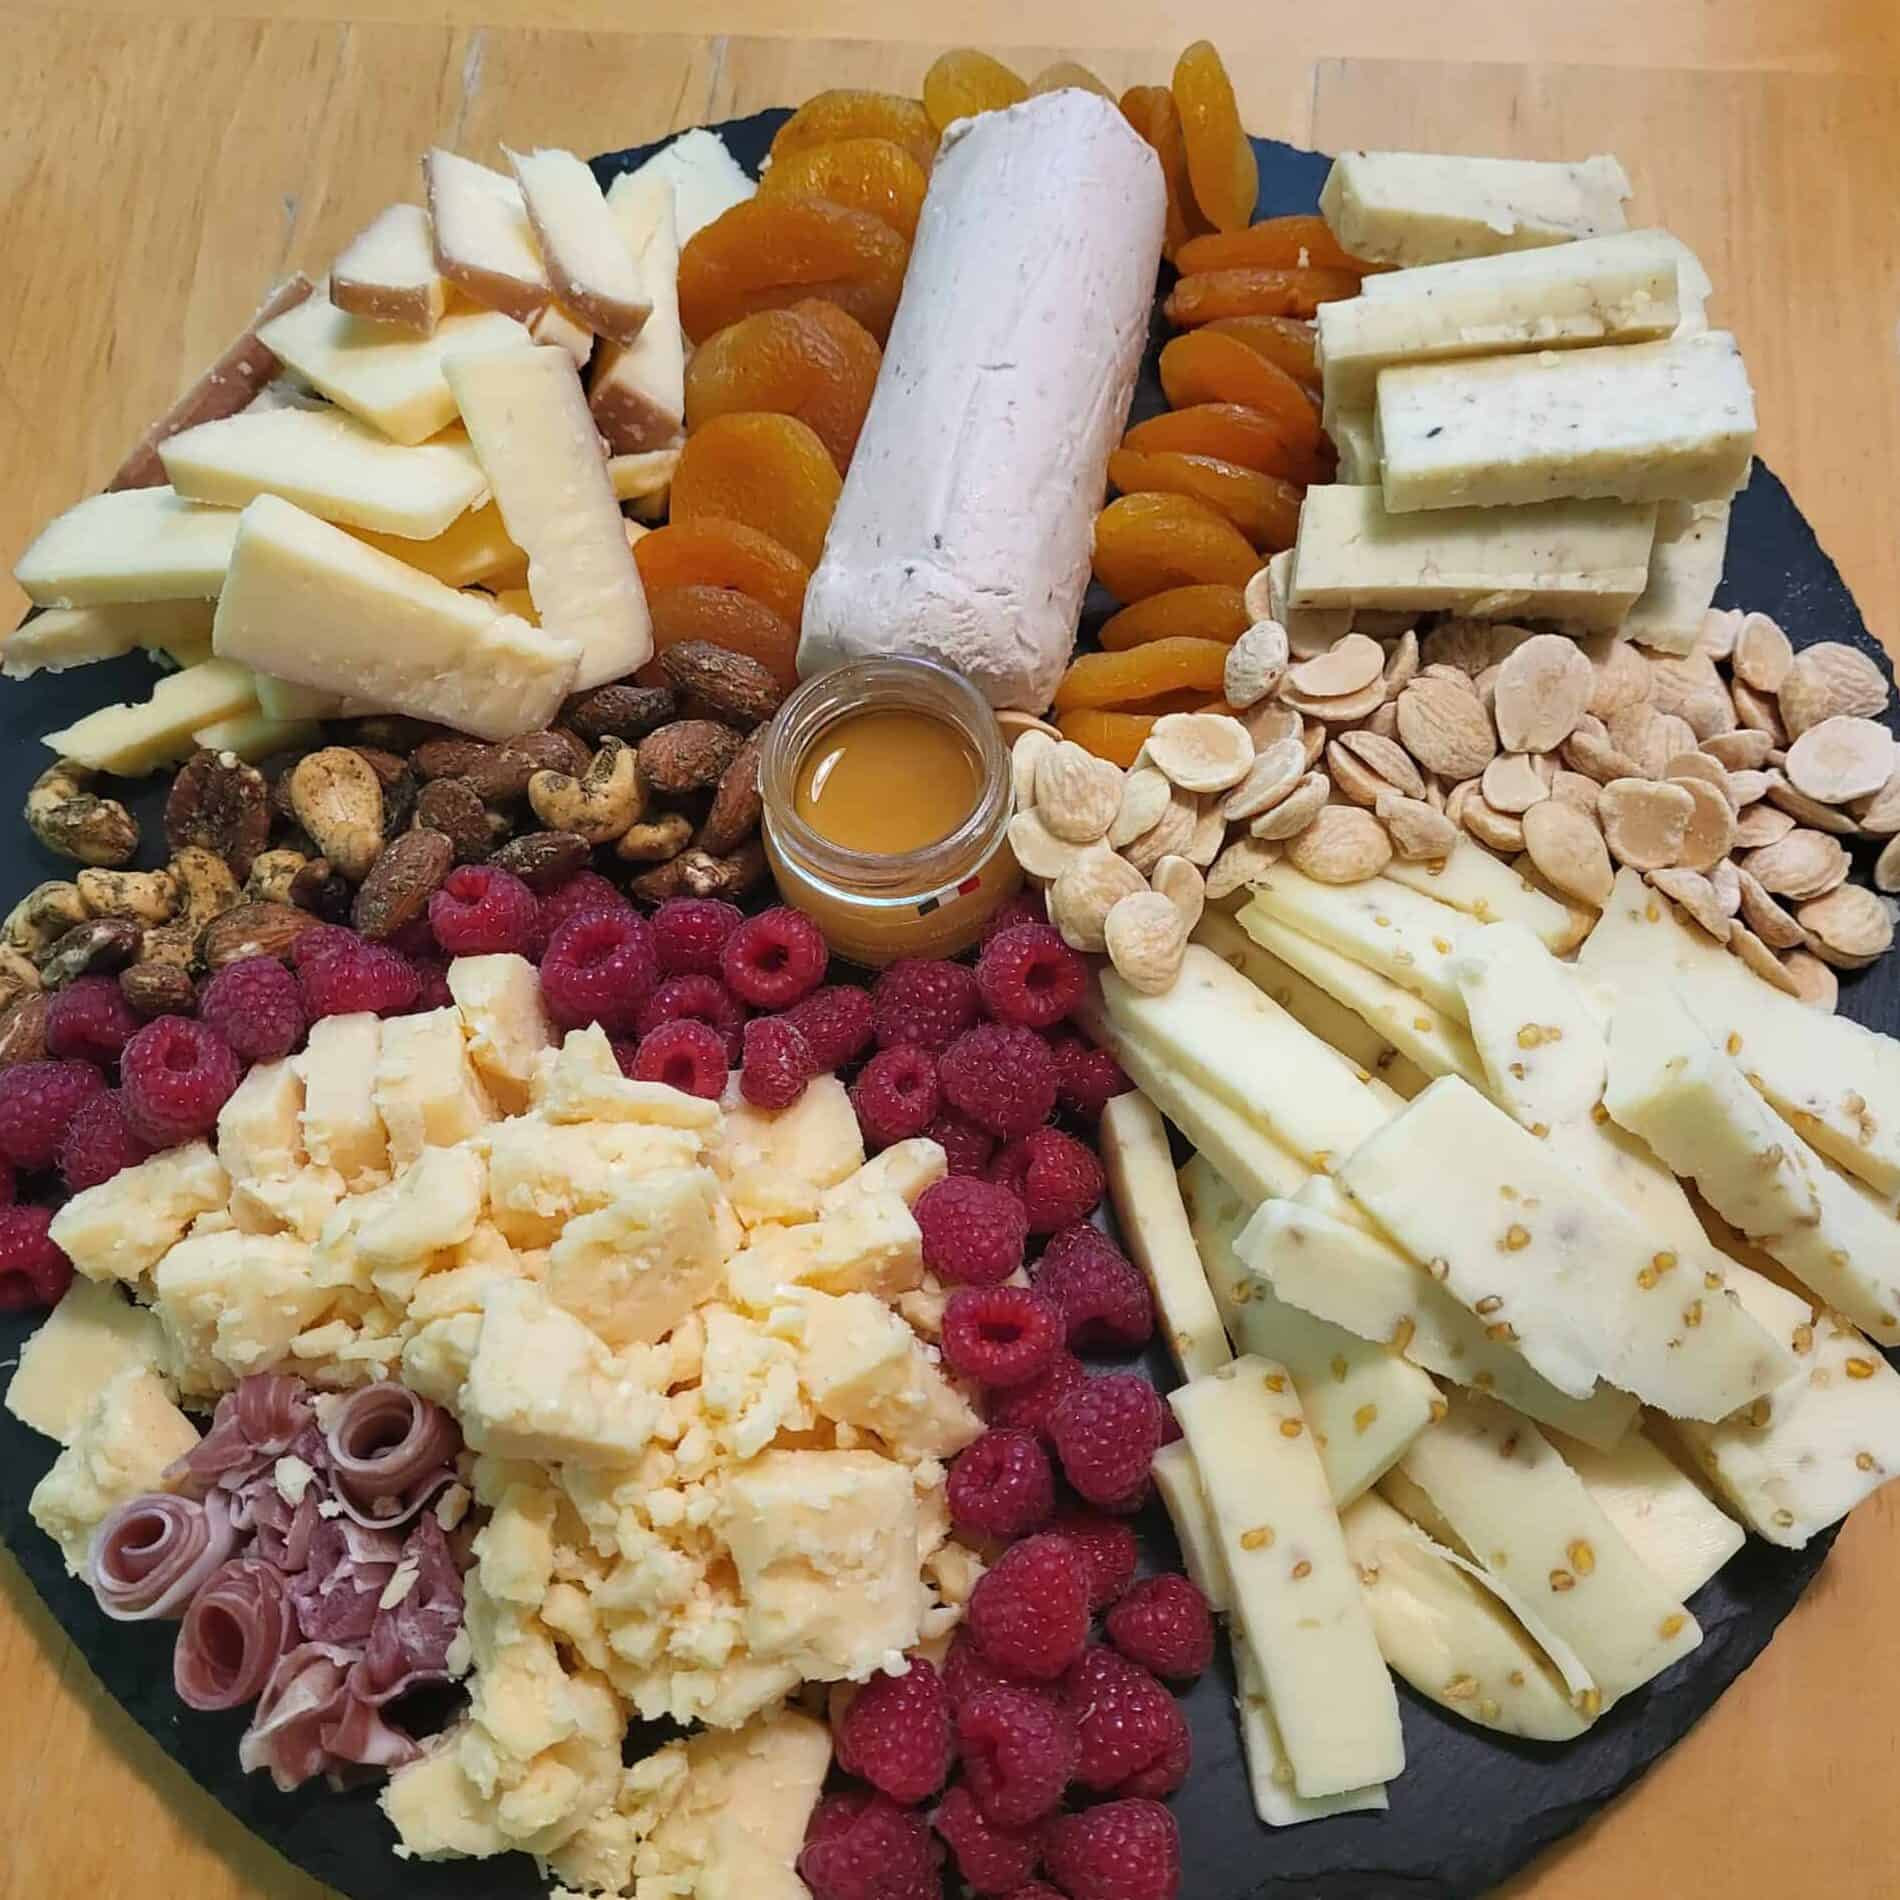 A charcuterie board with almonds, cheeses and raspberries